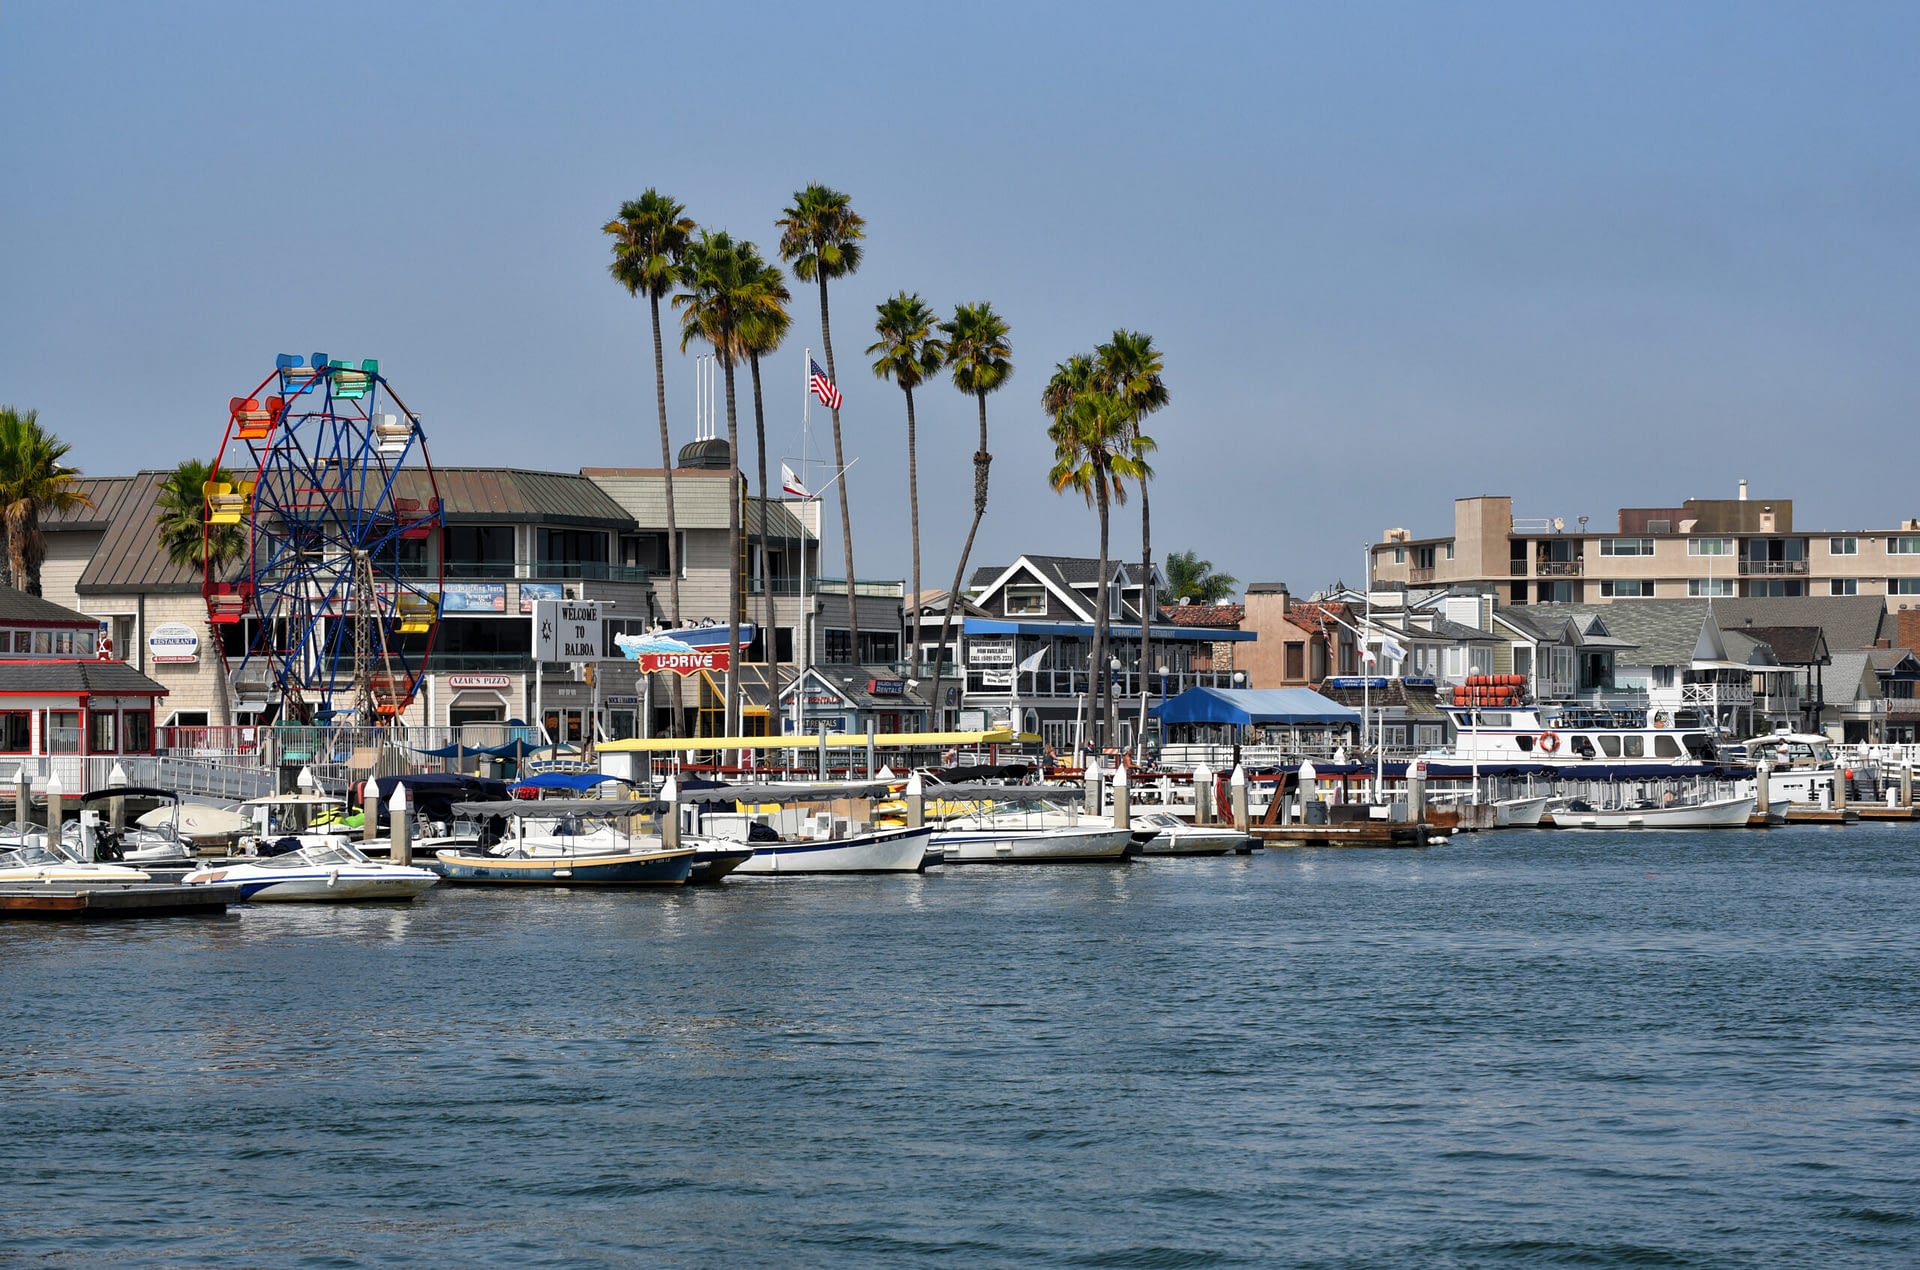 NEWPORT BEACH, CALIFORNIA - 24 AUG 2020: Boats at dock with the